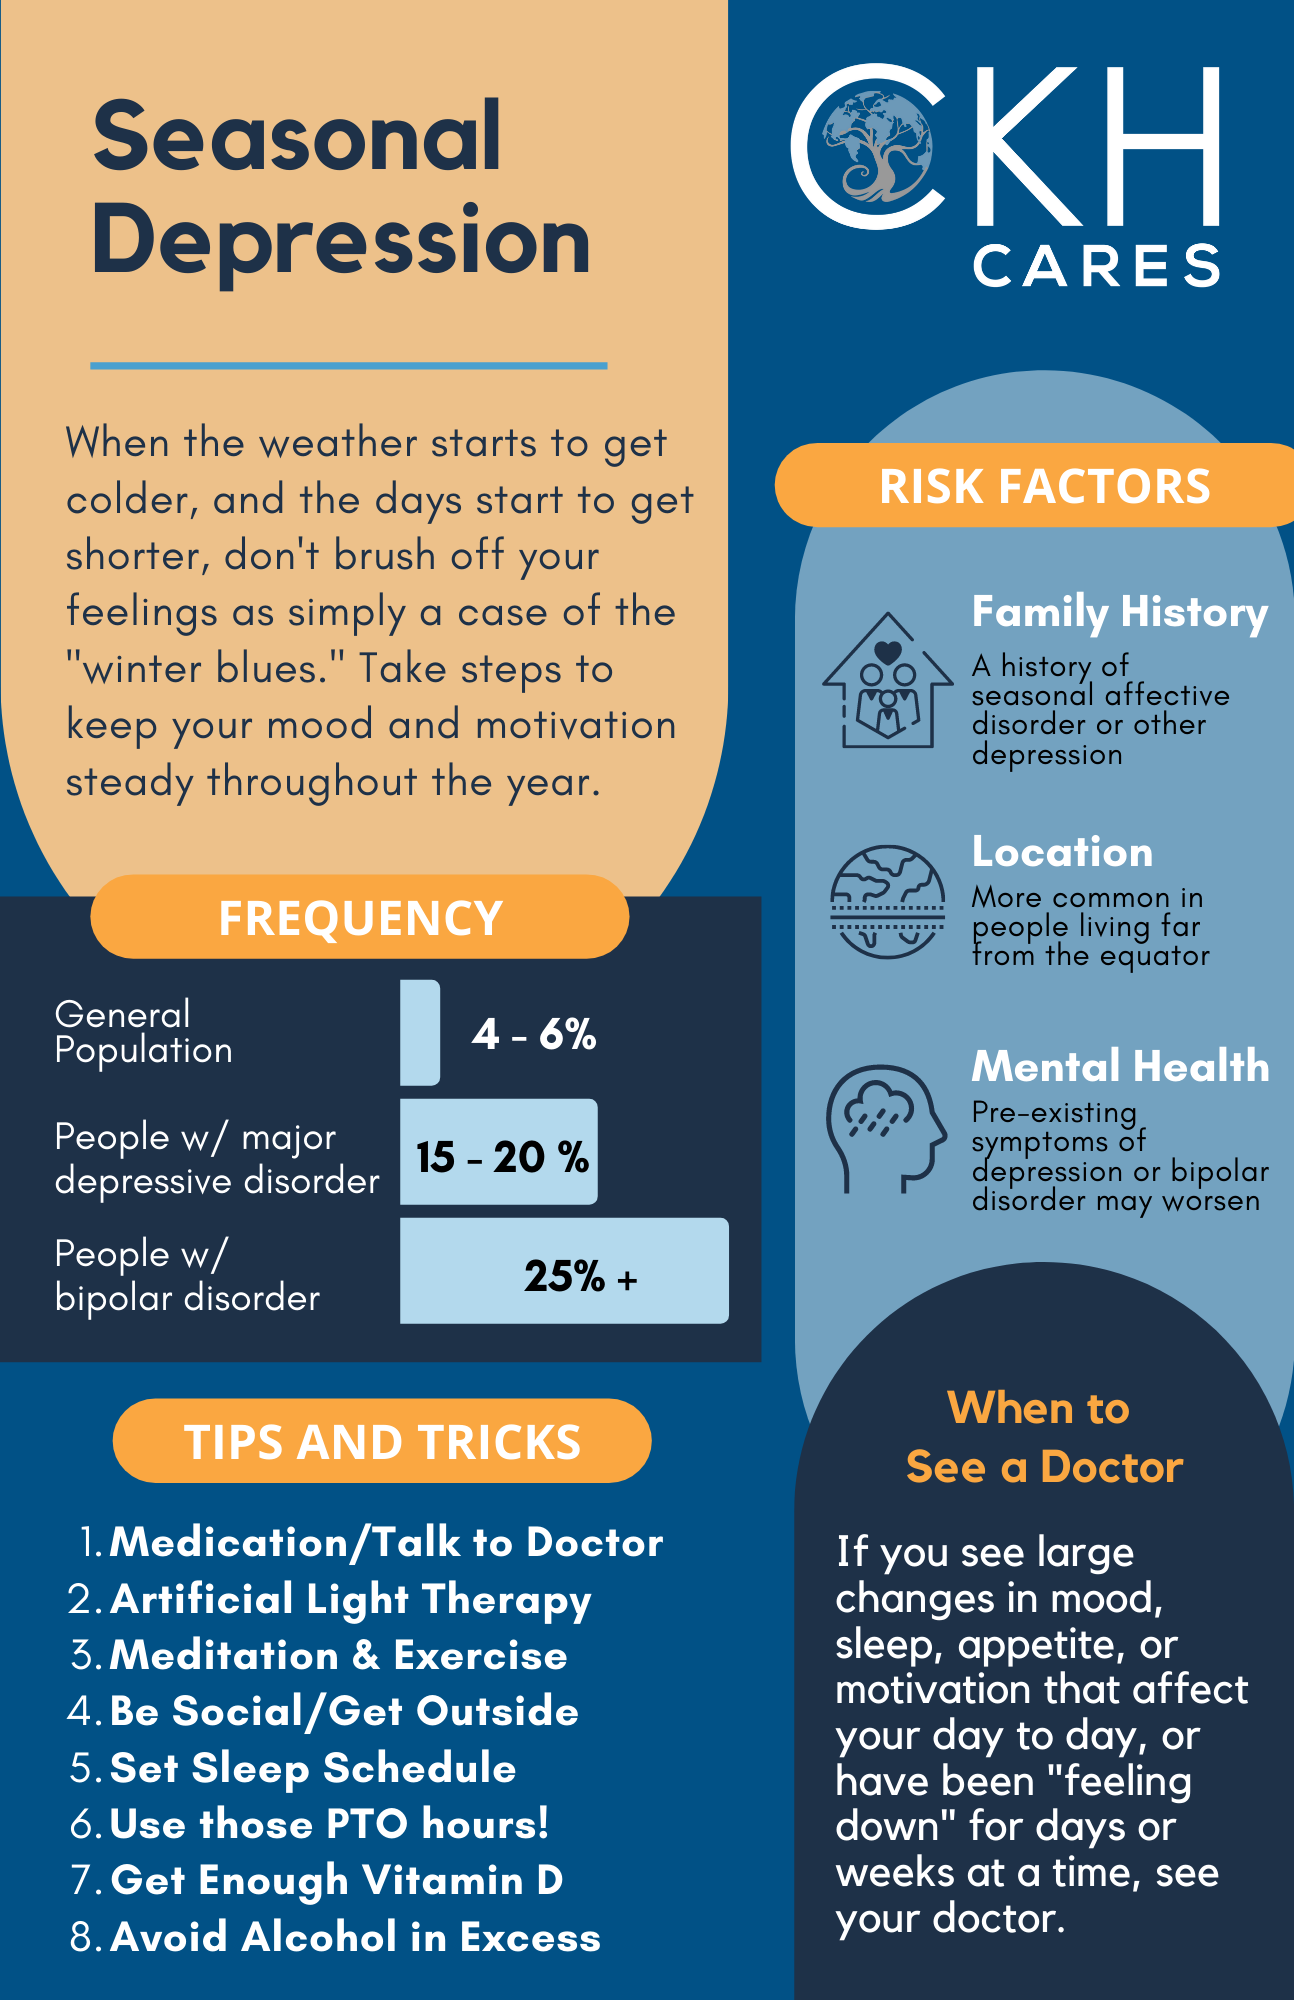 Infographic depicting information about seasonal depression like its frequency, tips to overcome it and the risk factors associated with it